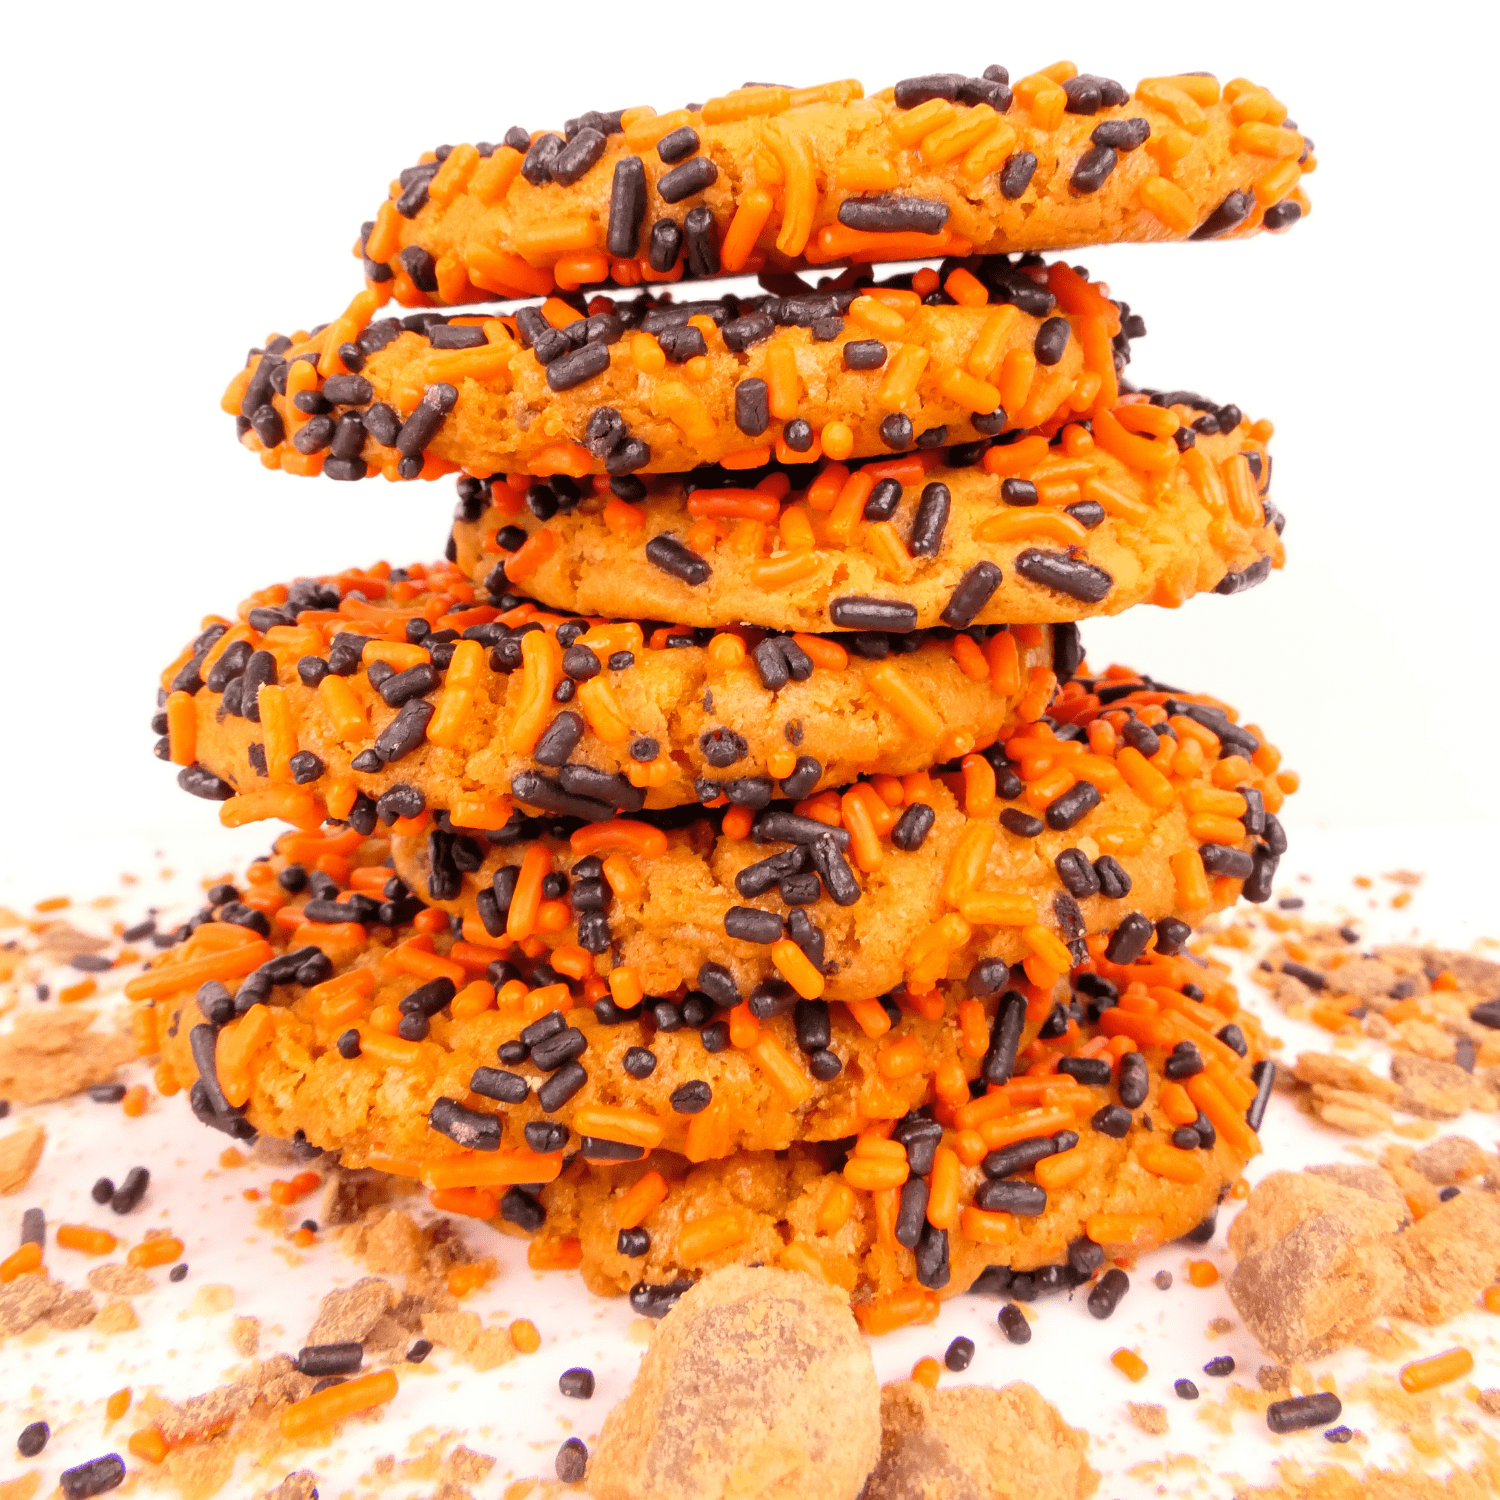 Jack o lantern cookies stacked on top of each other